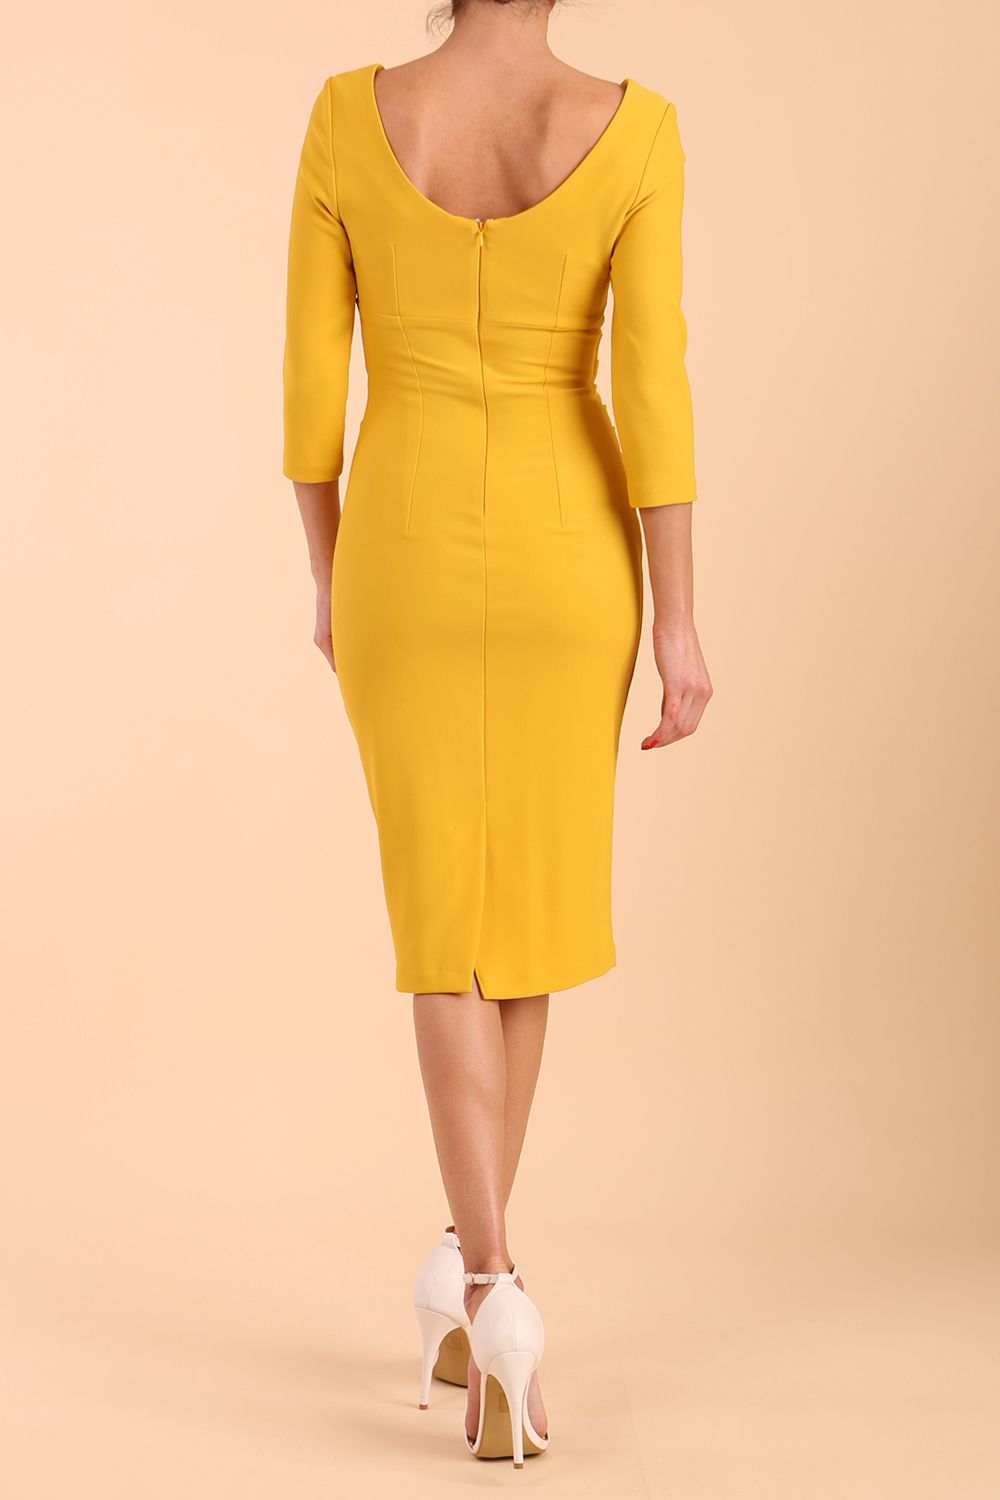 model is wearing diva catwalk polly sleeved pencil dress with low rounded neckline at the back in Mustard Yellow back